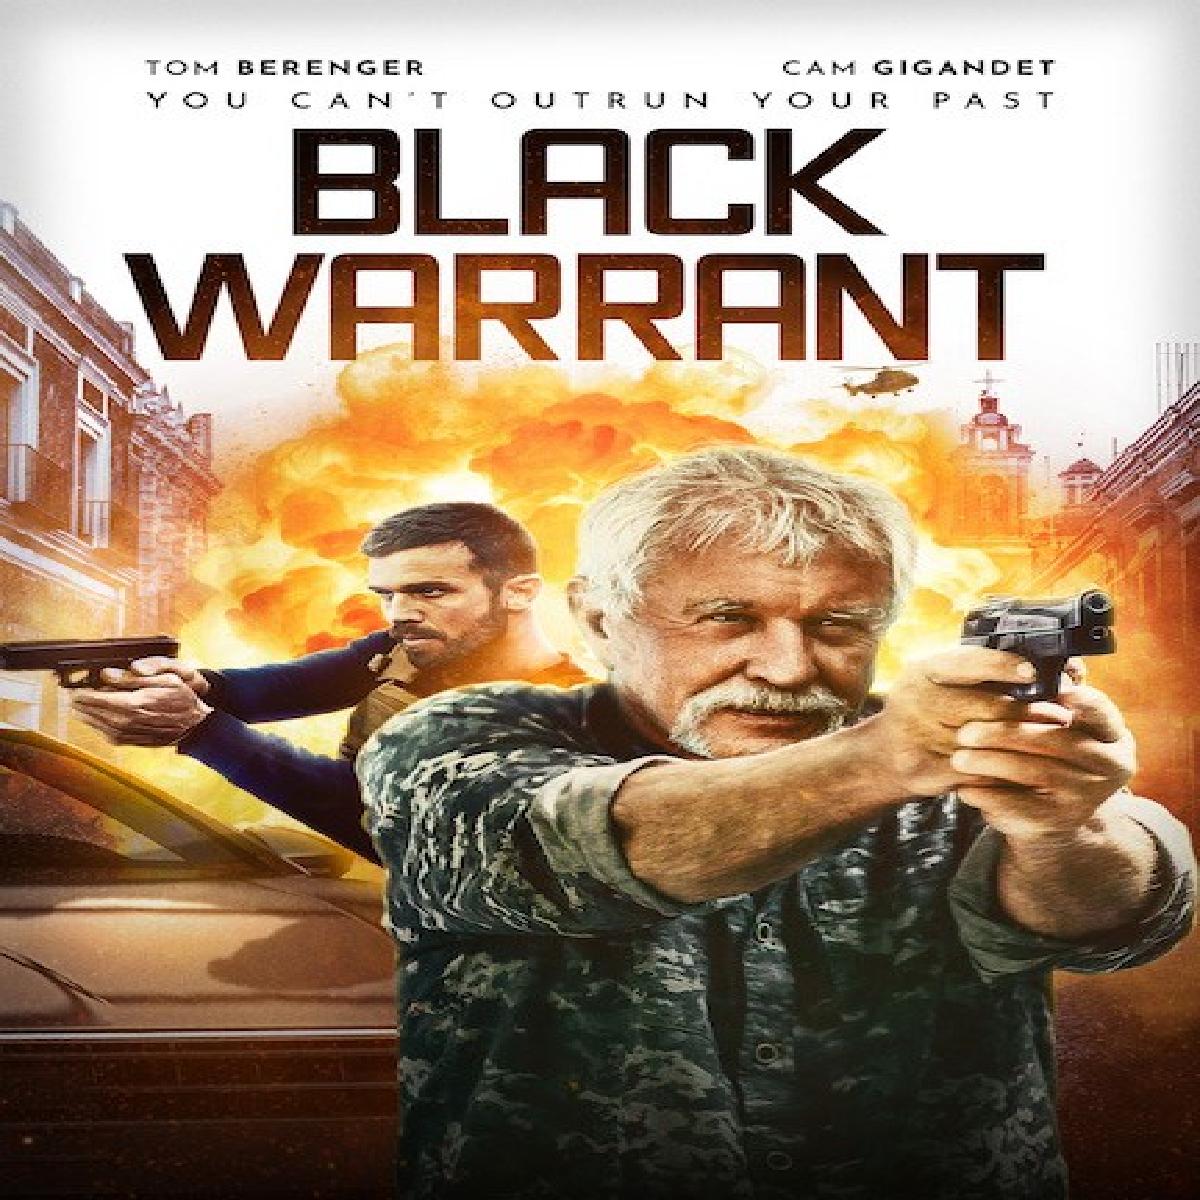 Black Warrant Trailer Is Out